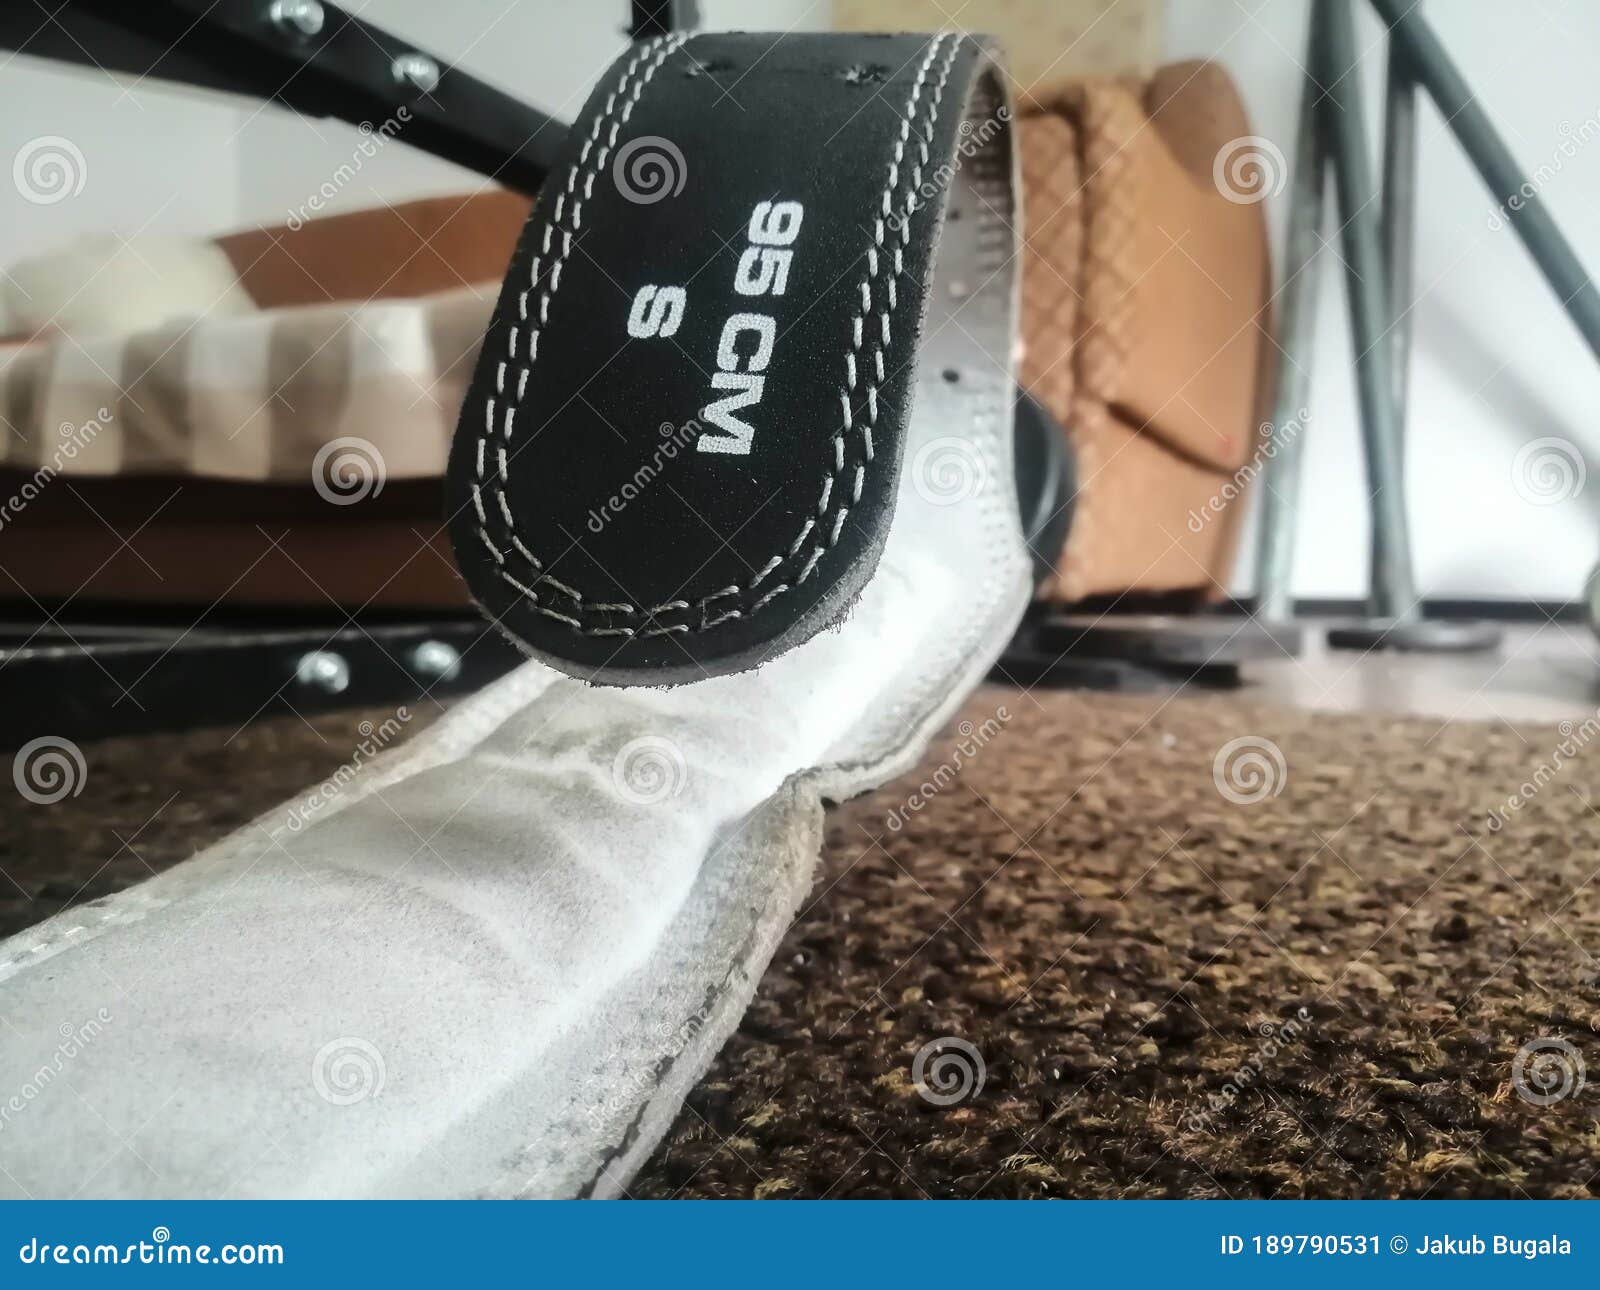 Laid Black Gym Belt on the Ground in the Home Gym Stock Image - Image